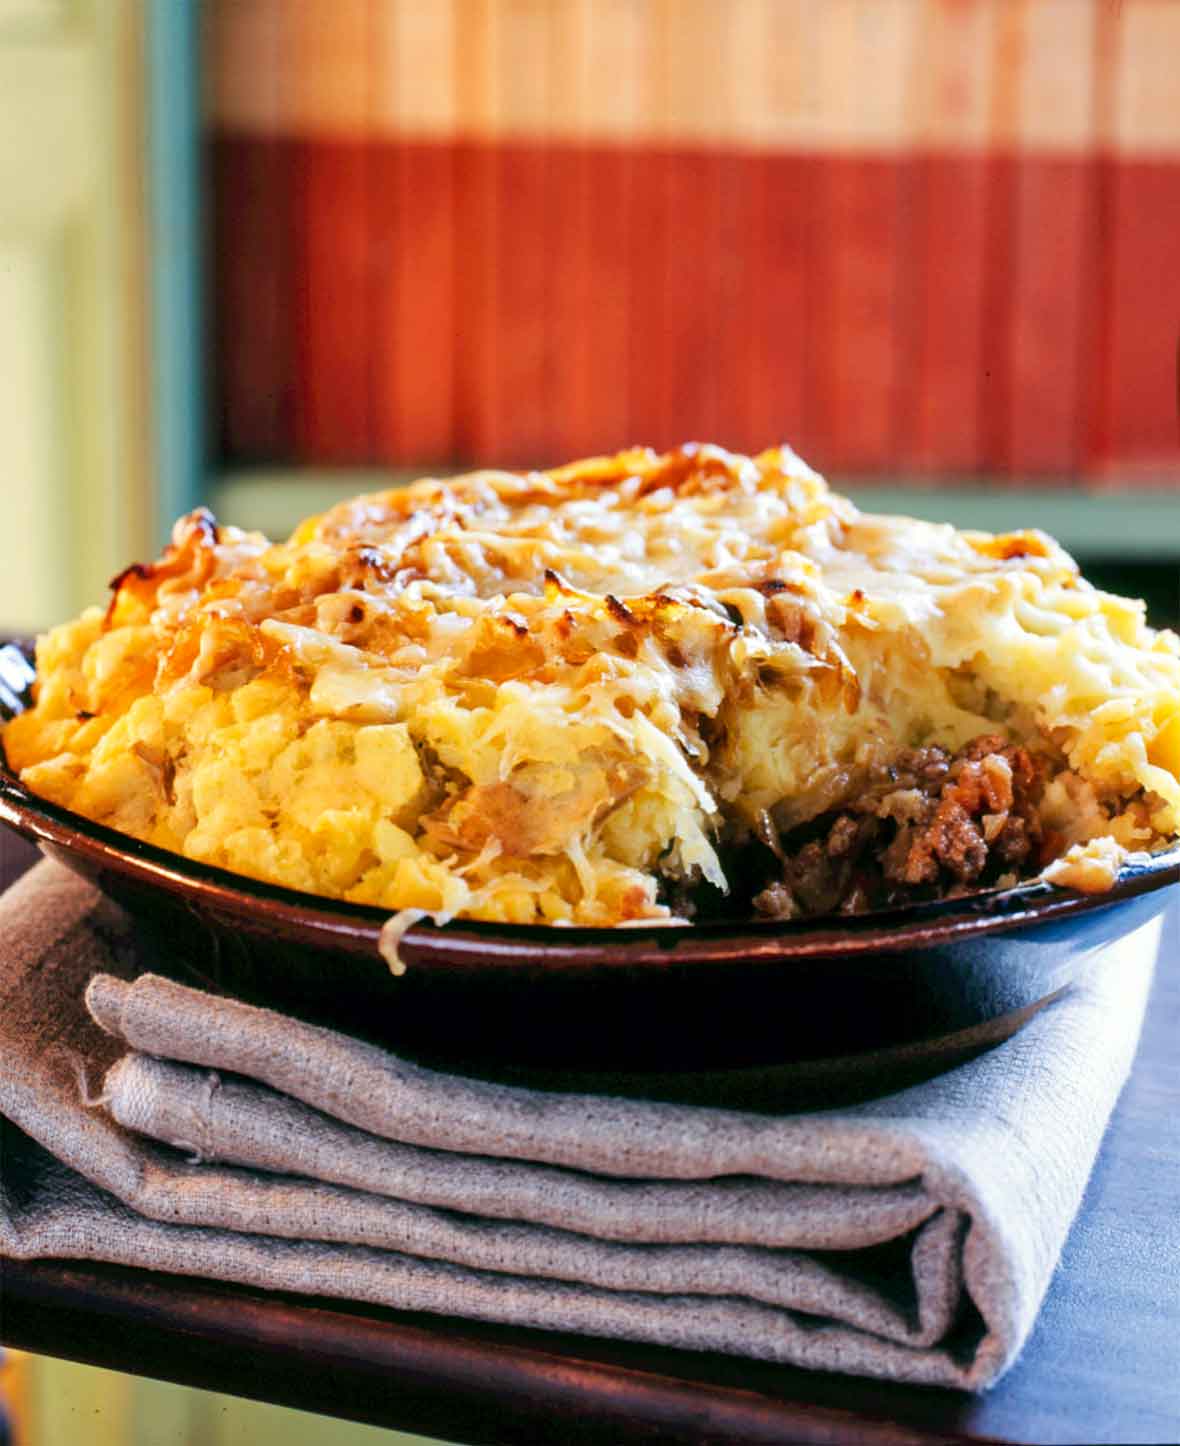 Shepherd’s pie with onions and cheddar